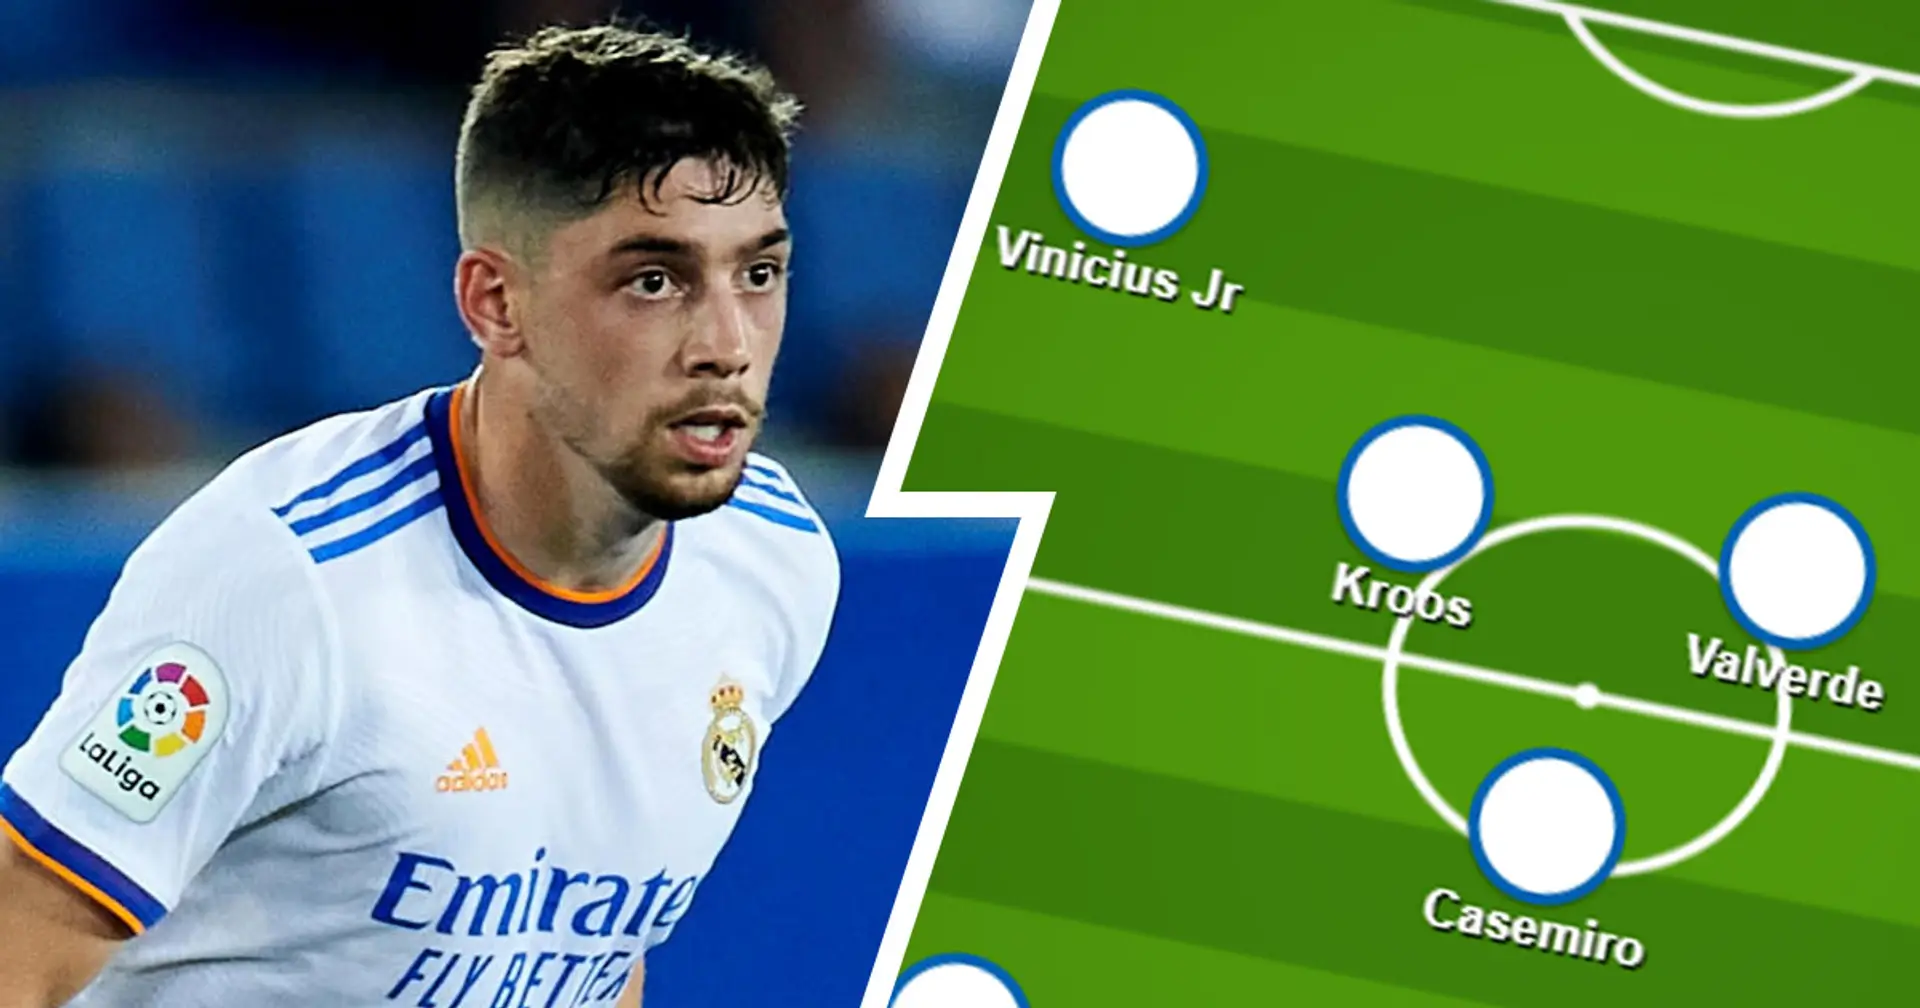 Team news for Real Madrid vs Valencia, probable line-ups, score predictions